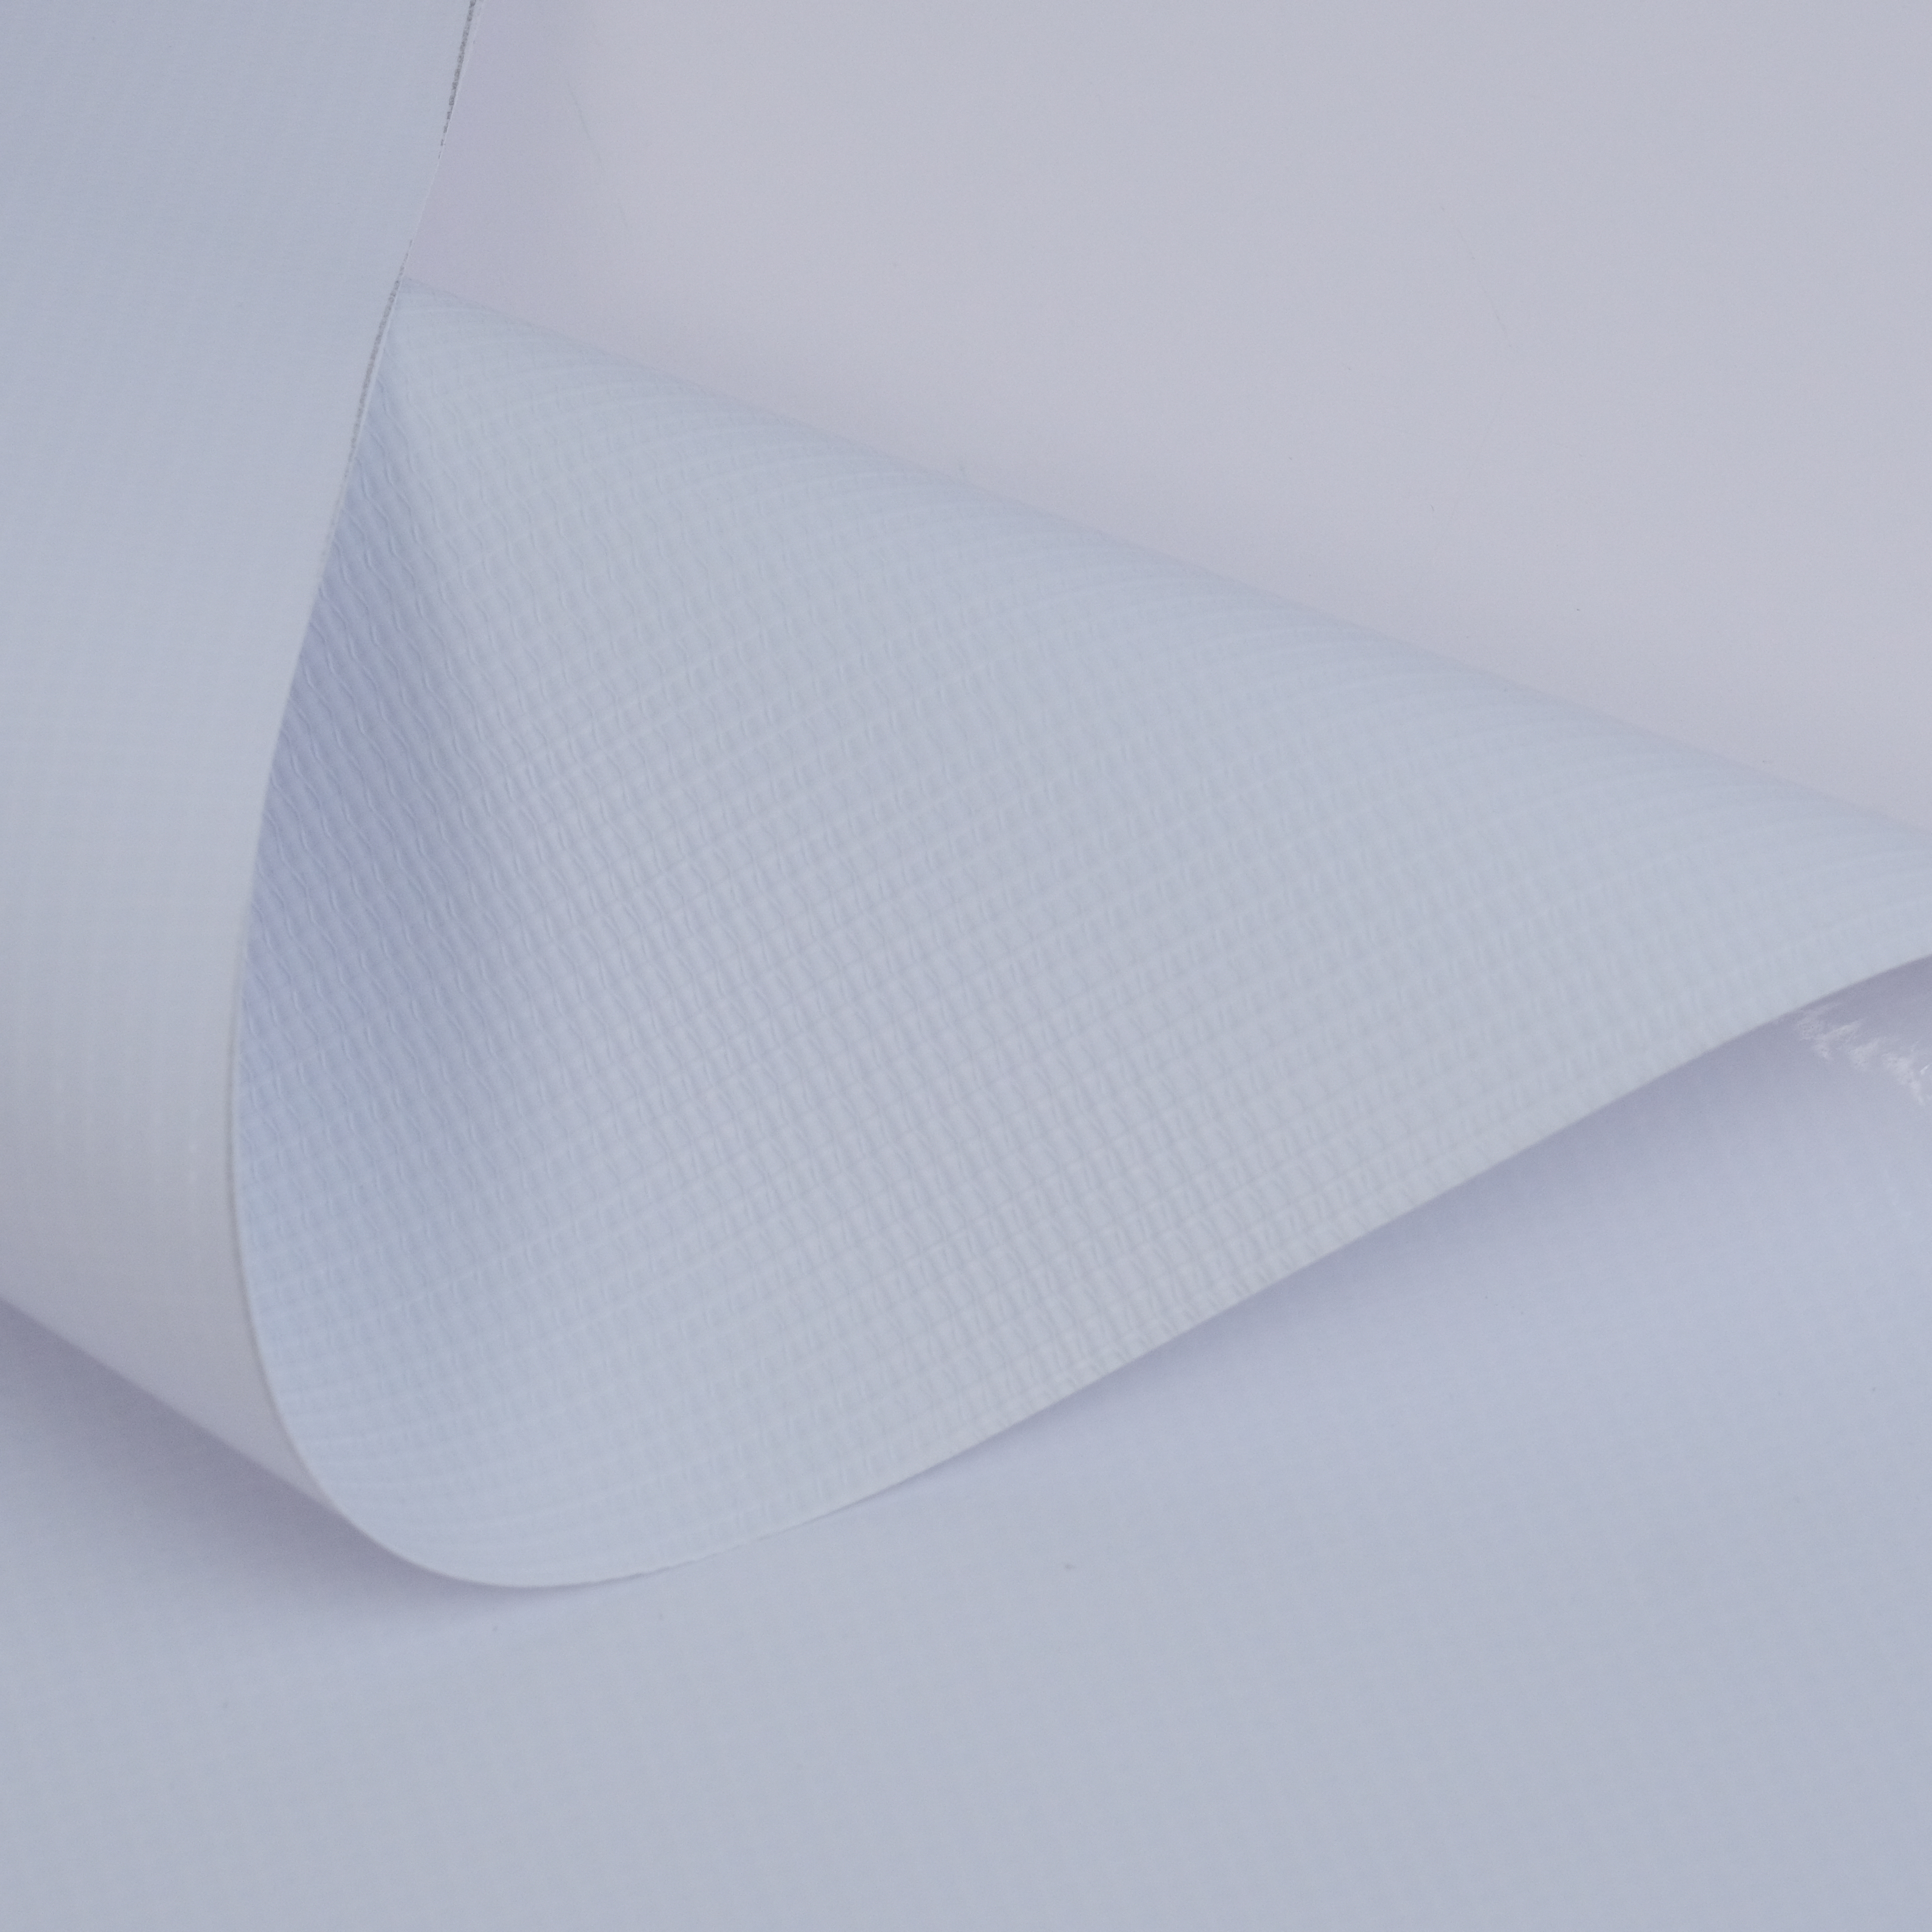 Waterproofing Membranes Market Size Projected to Reach USD